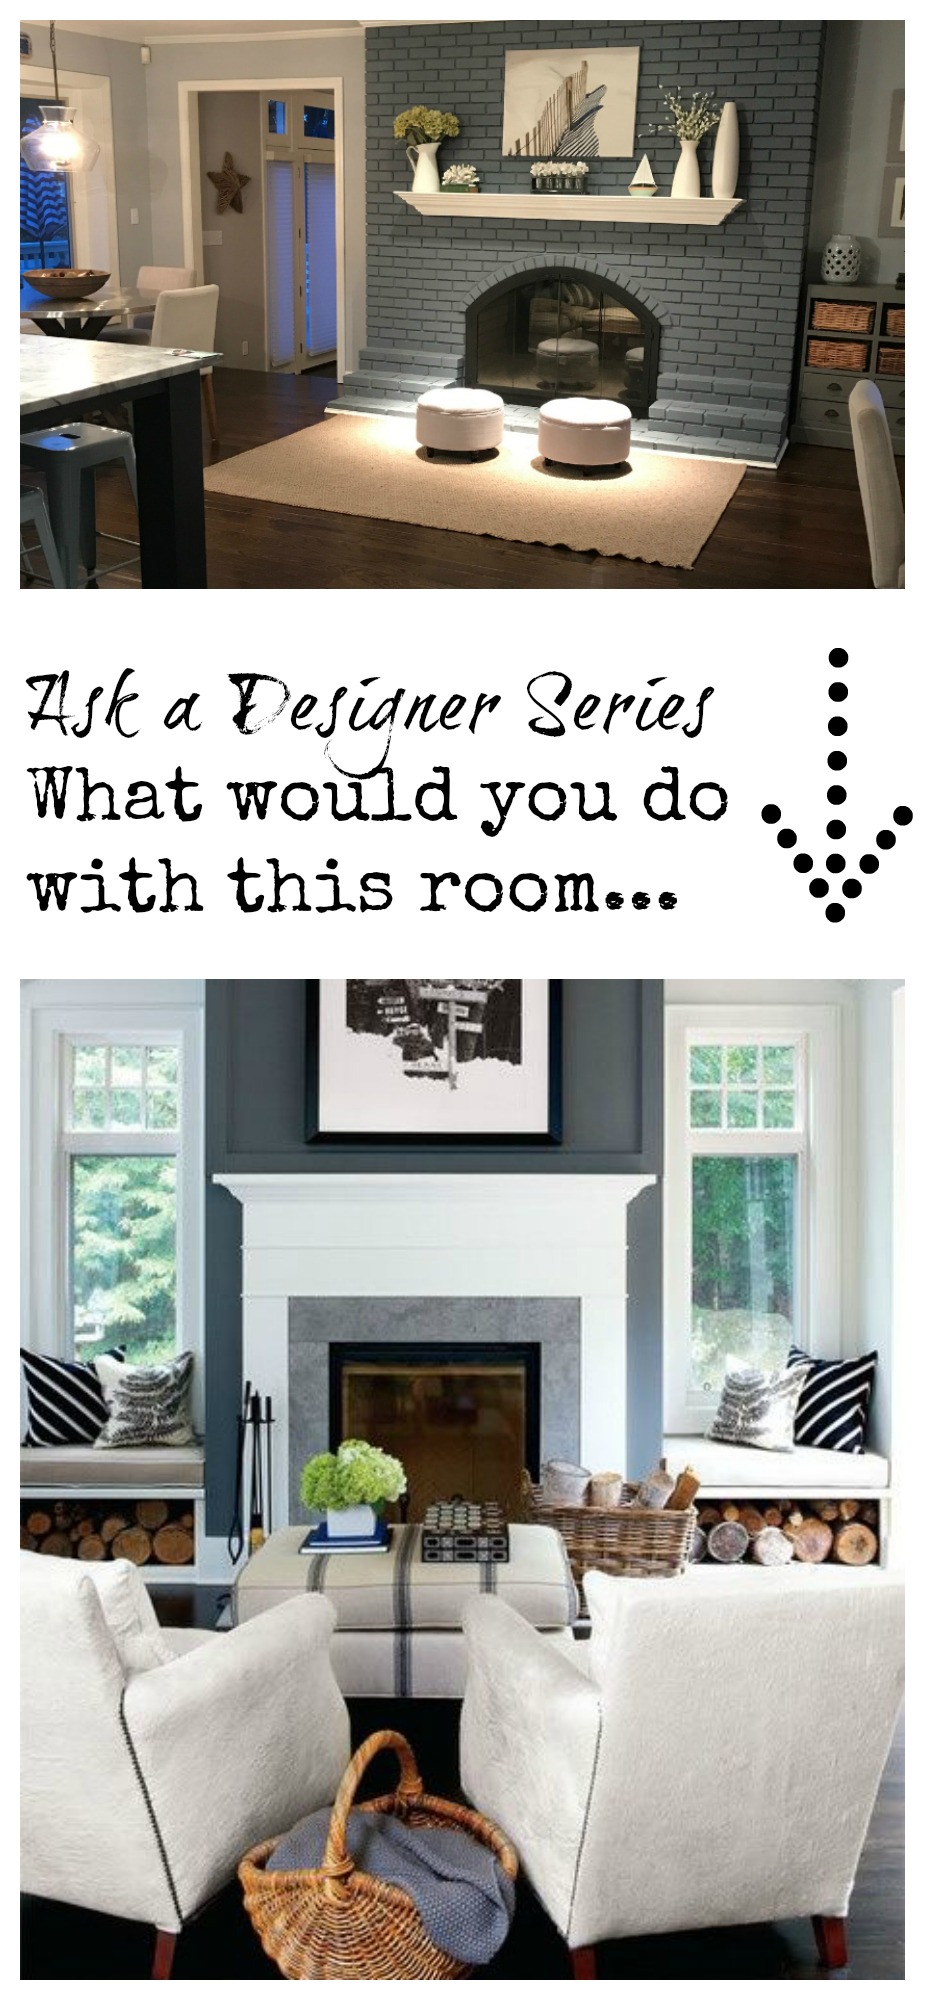 Ask A Desinger Series- What would you do around my fireplace? 